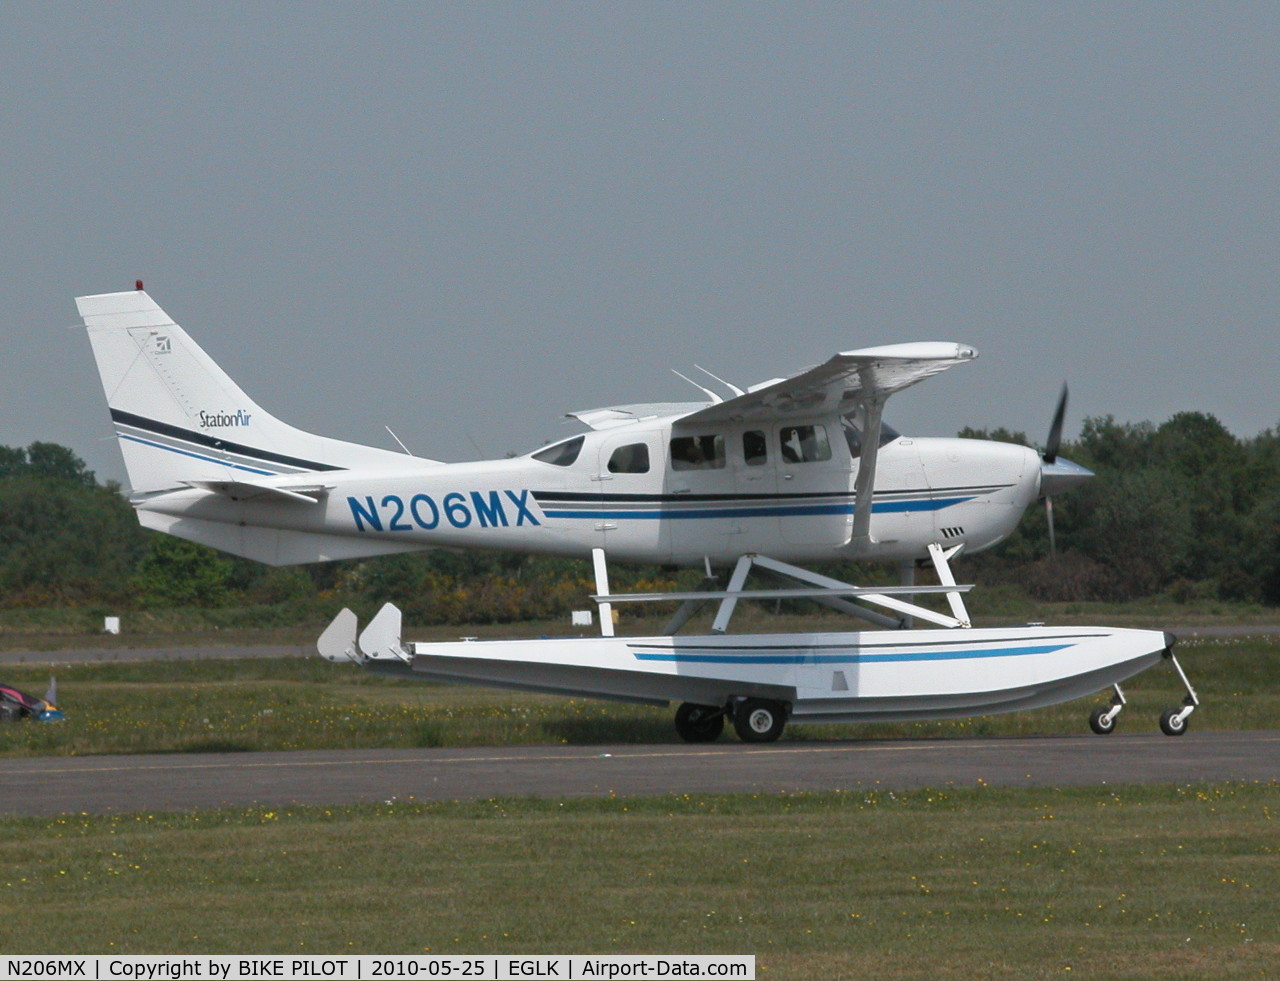 N206MX, 2001 Cessna 206H Stationair C/N 20608149, NICE VISITOR TAXYING FROM ITS PARKING SPOT